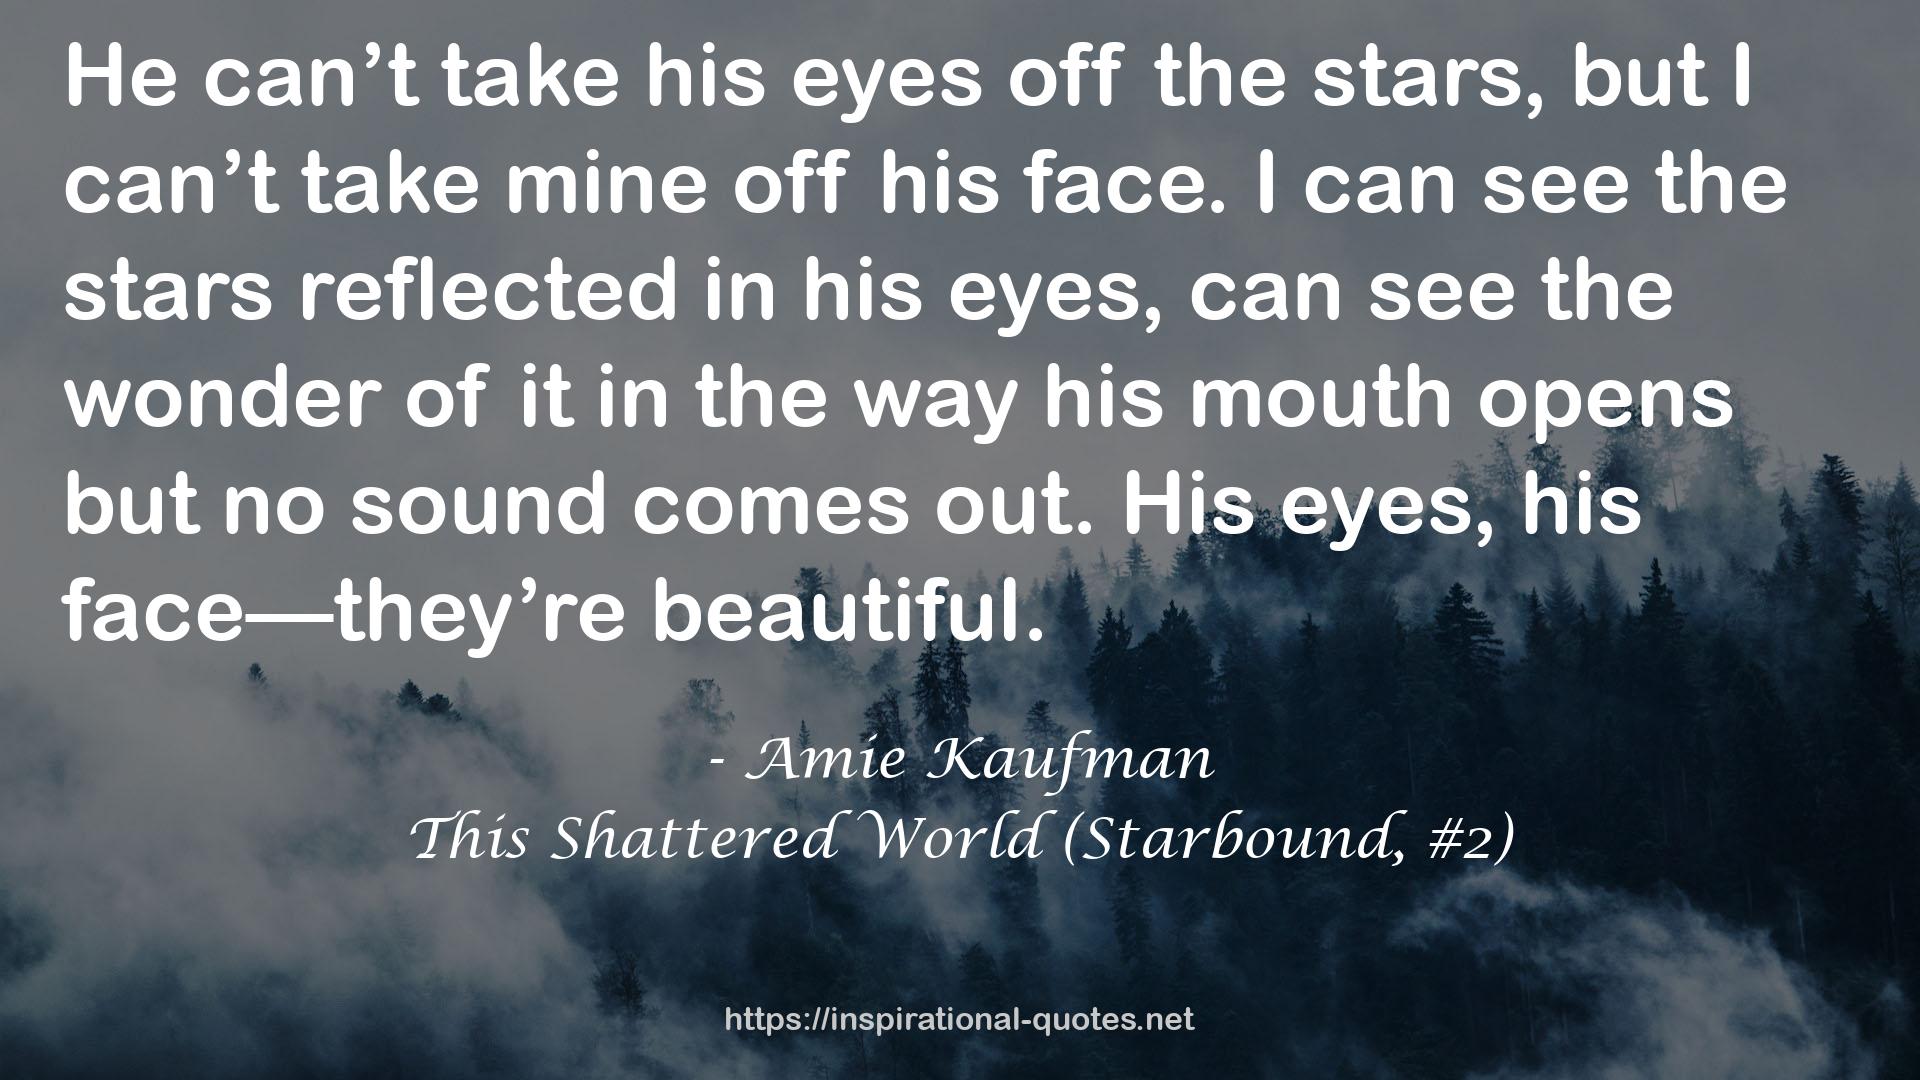 This Shattered World (Starbound, #2) QUOTES